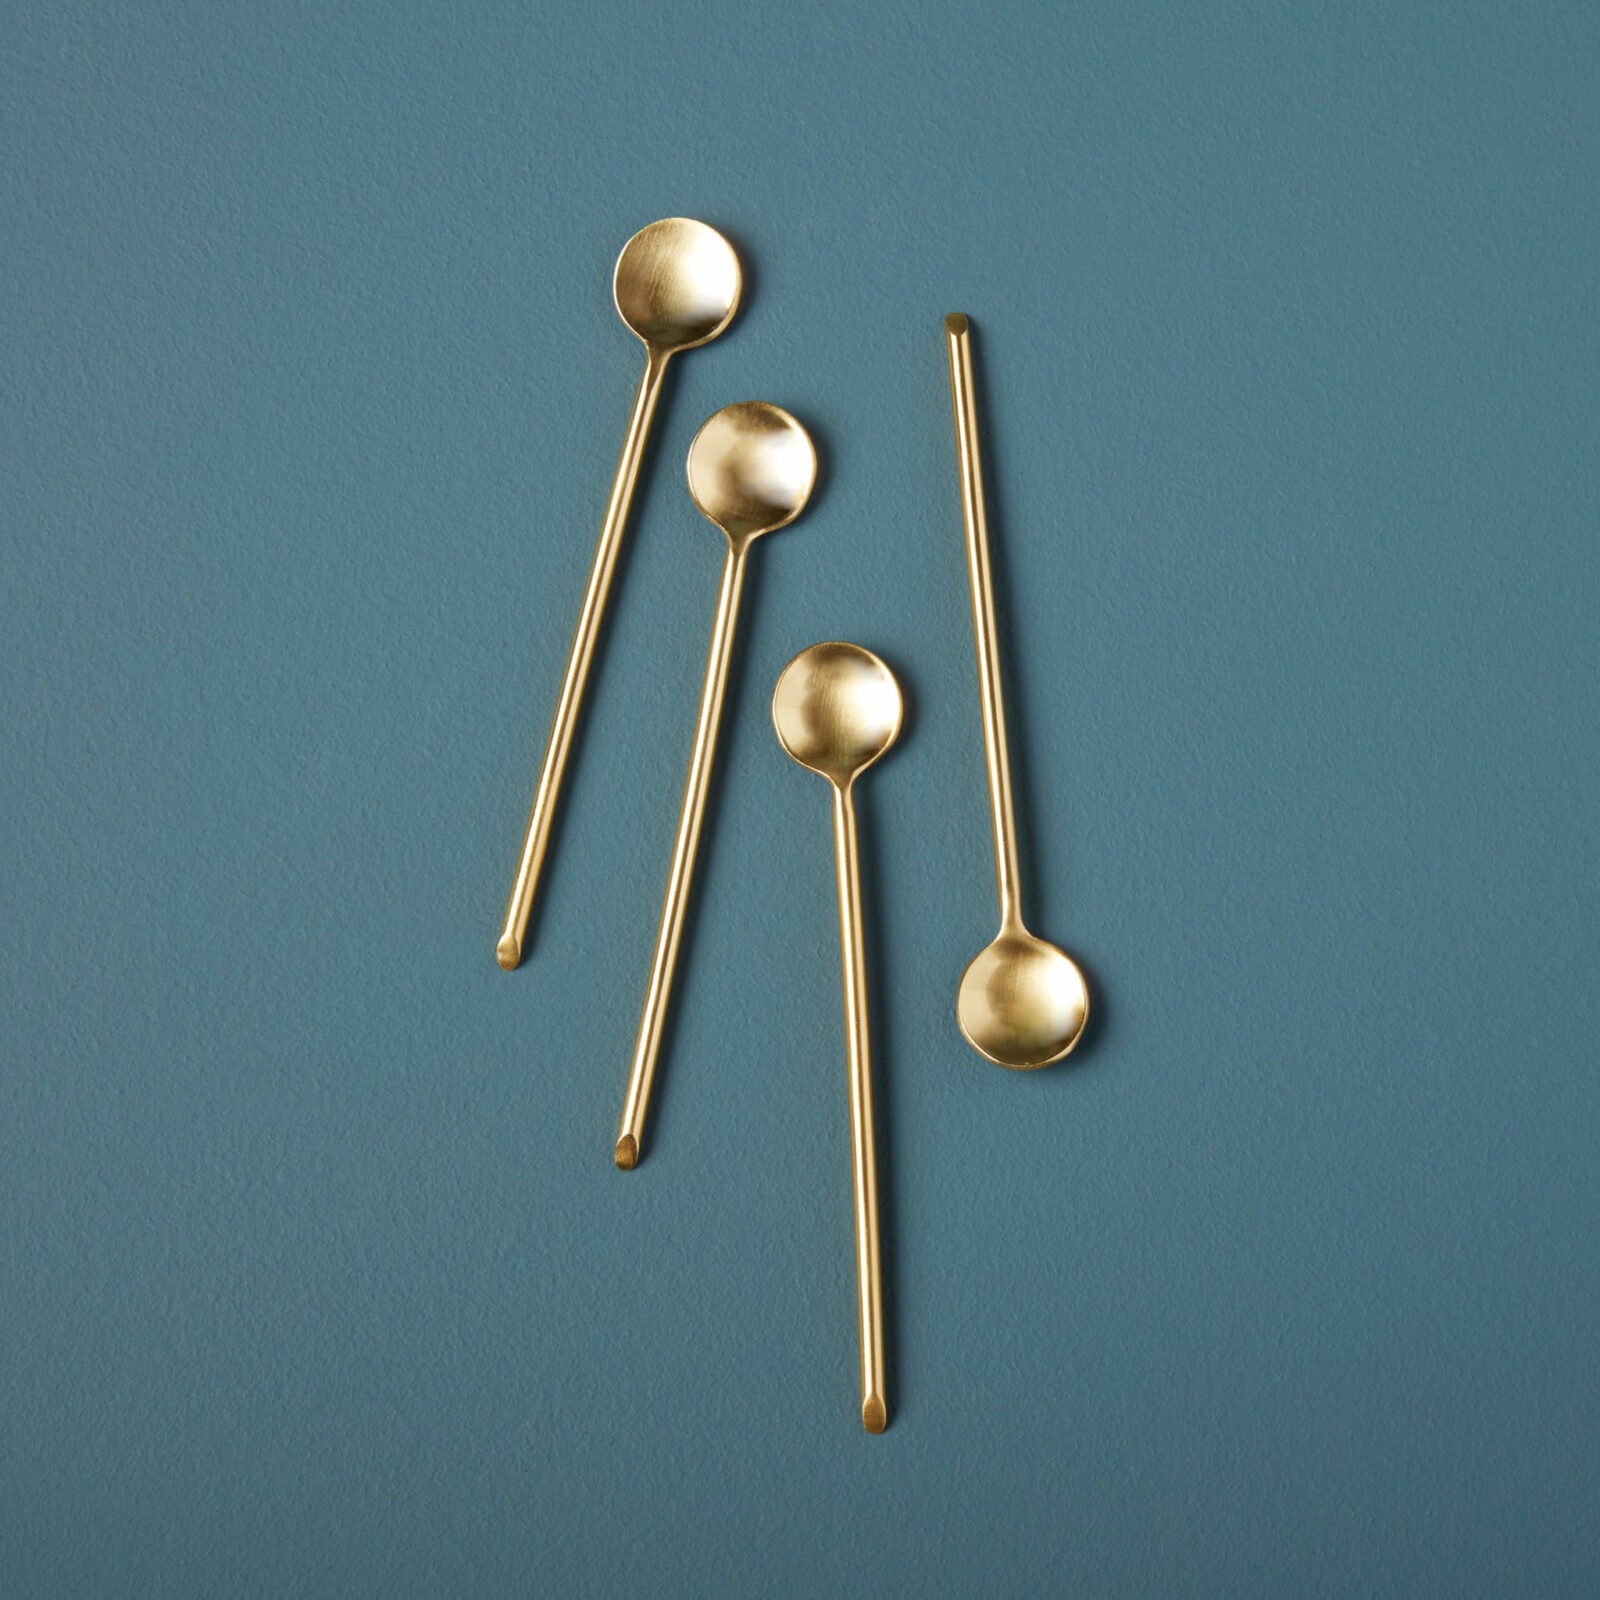 Thin Gold Spoon